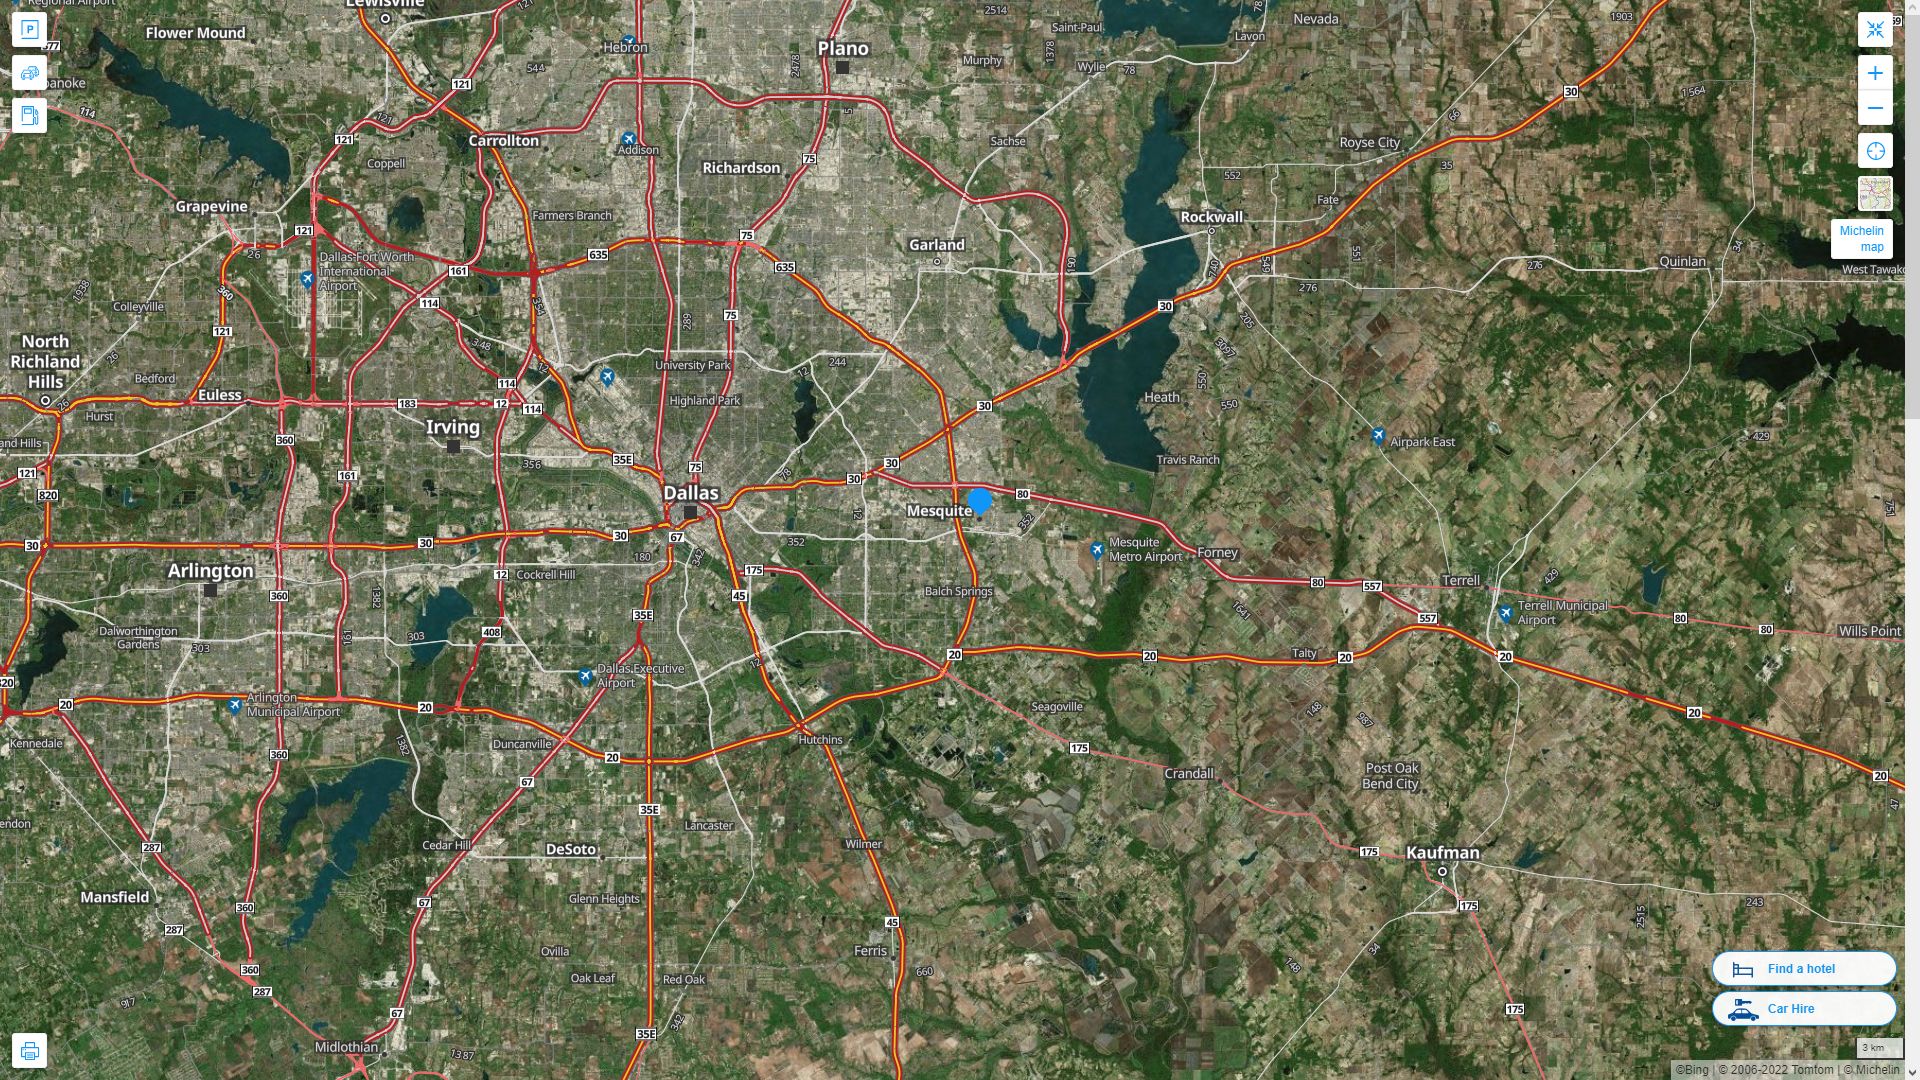 Mesquite Texas Highway and Road Map with Satellite View